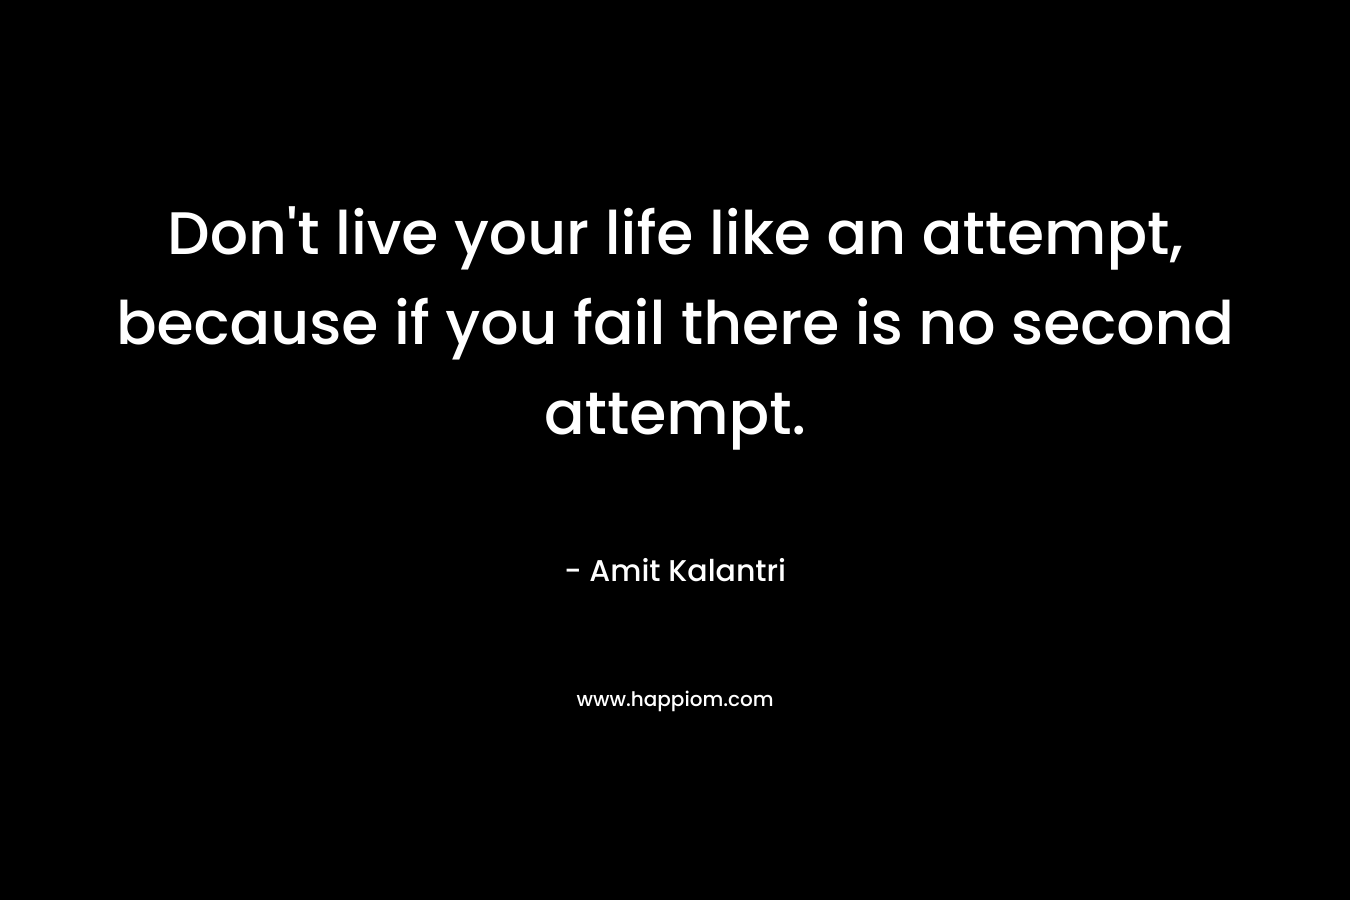 Don't live your life like an attempt, because if you fail there is no second attempt.